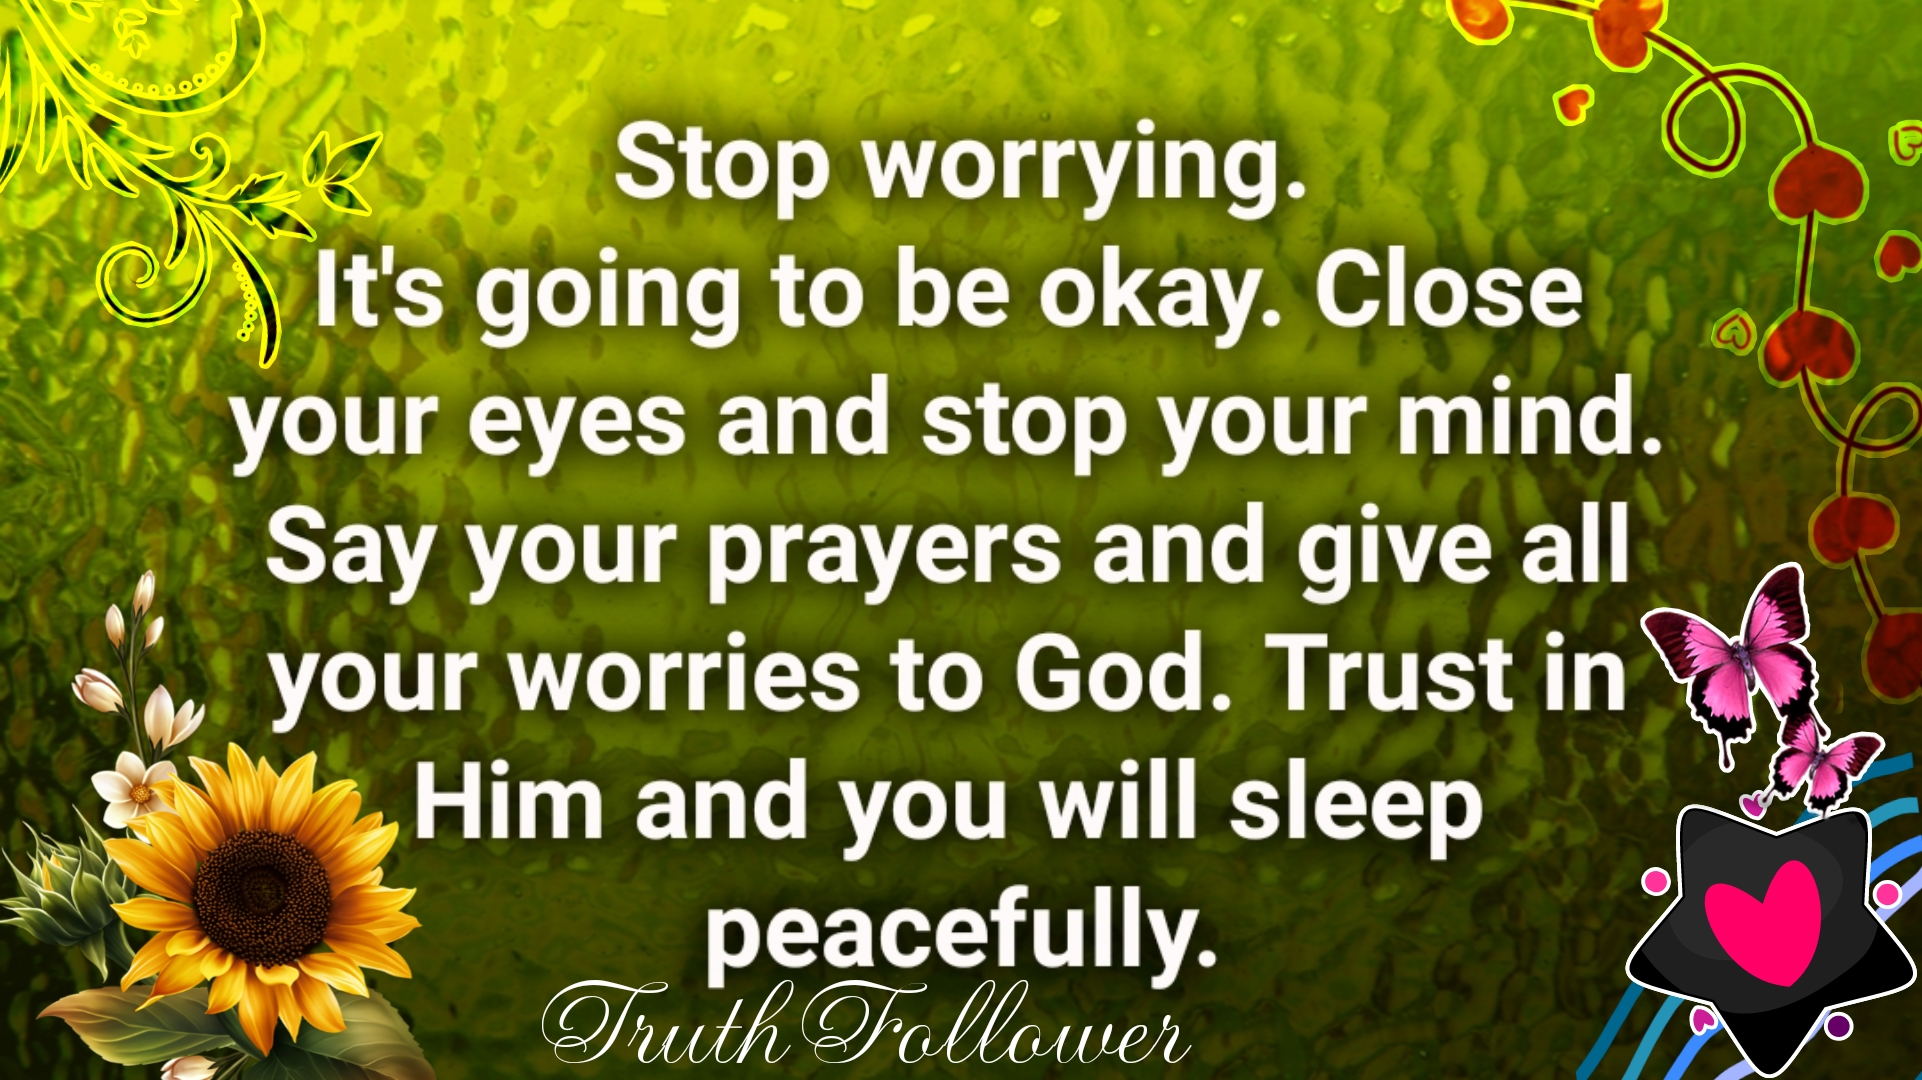 it-s-going-to-be-okay-stop-worrying